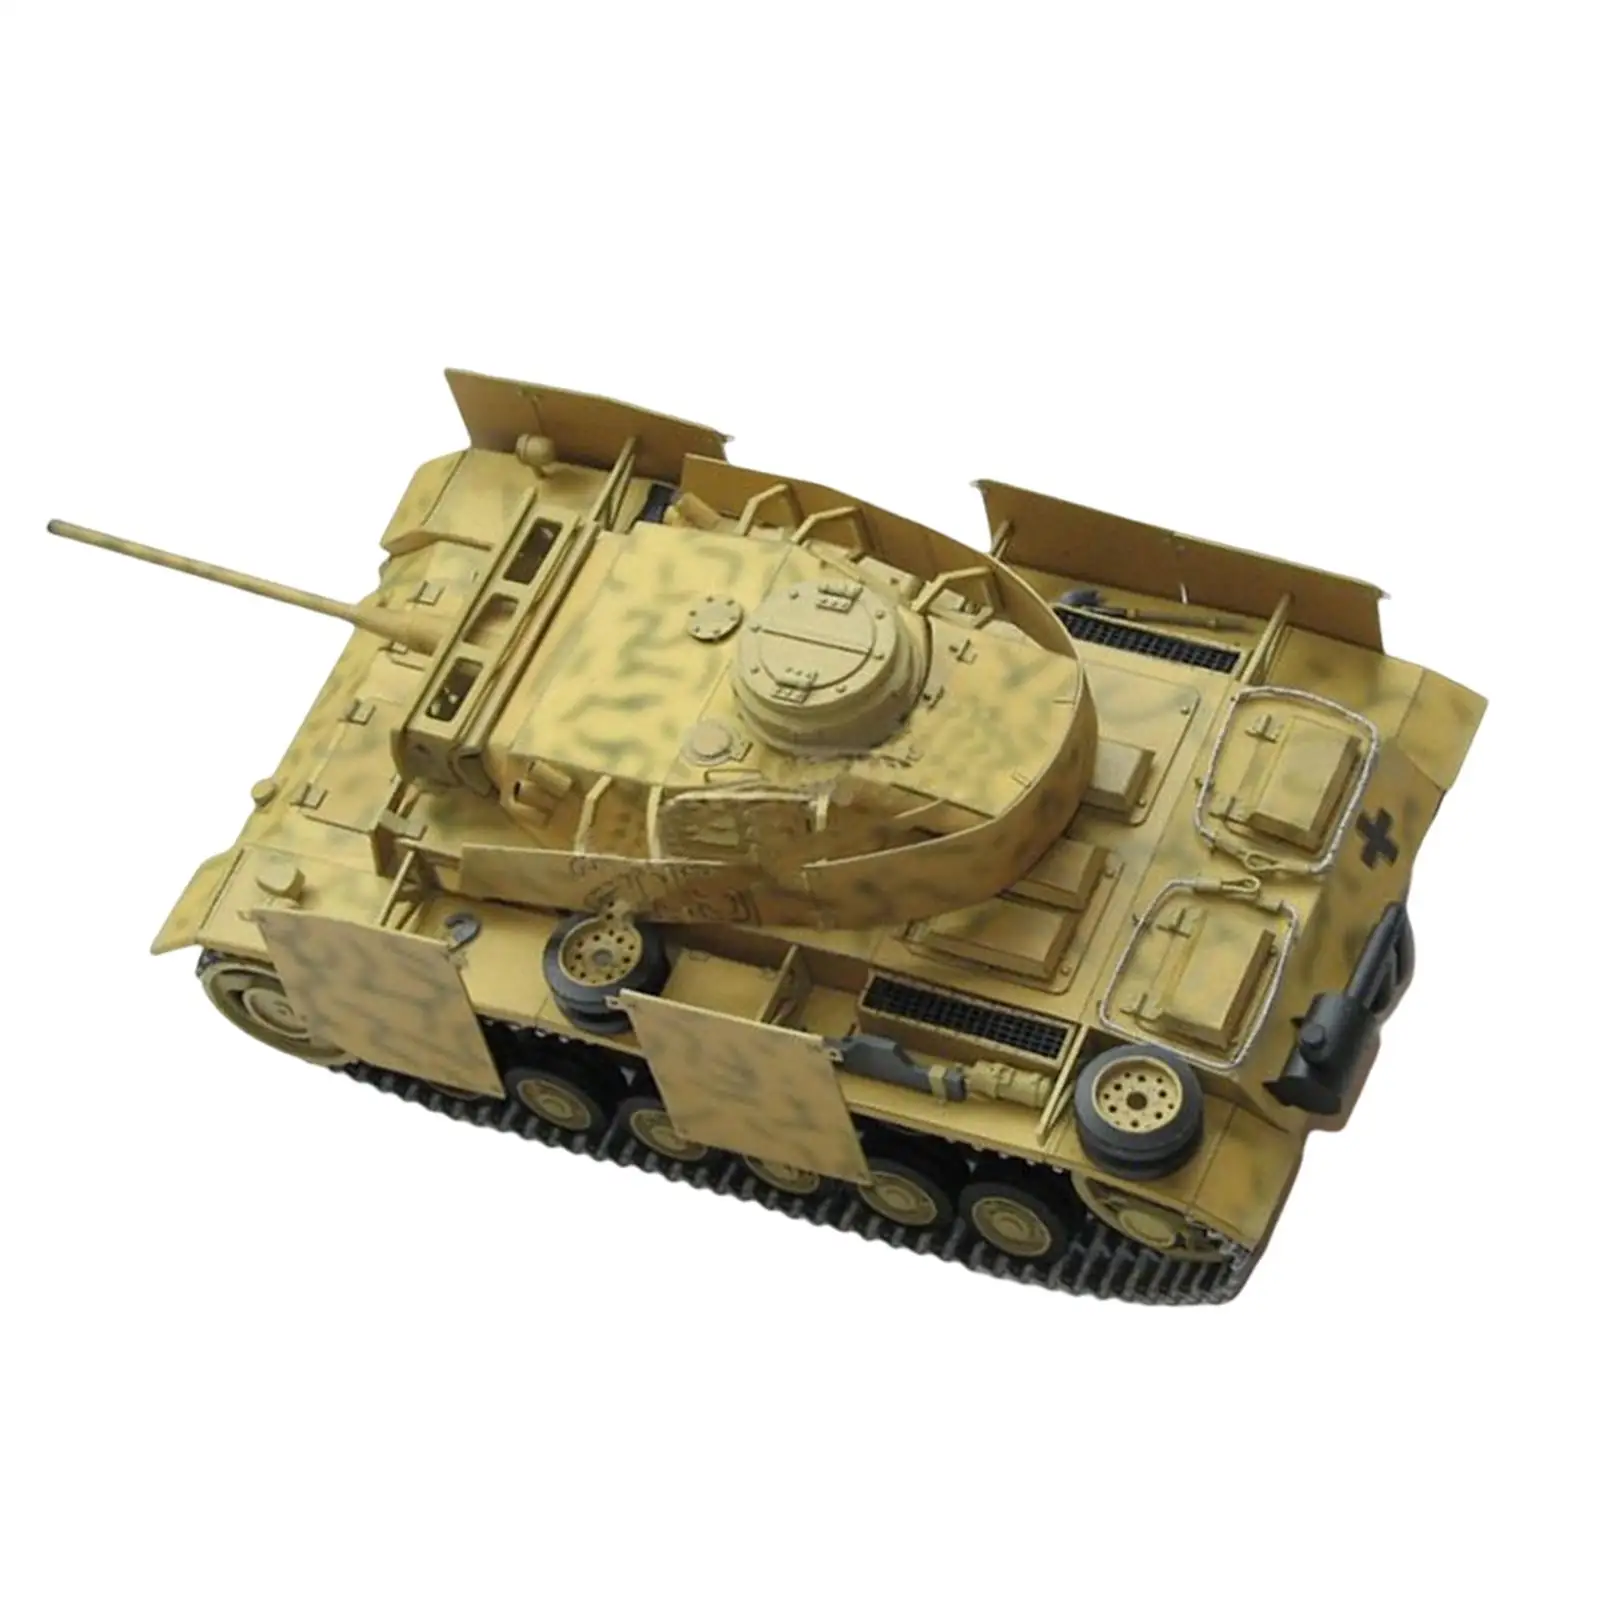 1:25 Scale Tank Model Paper Craft Decorative Toy for Girls Boys